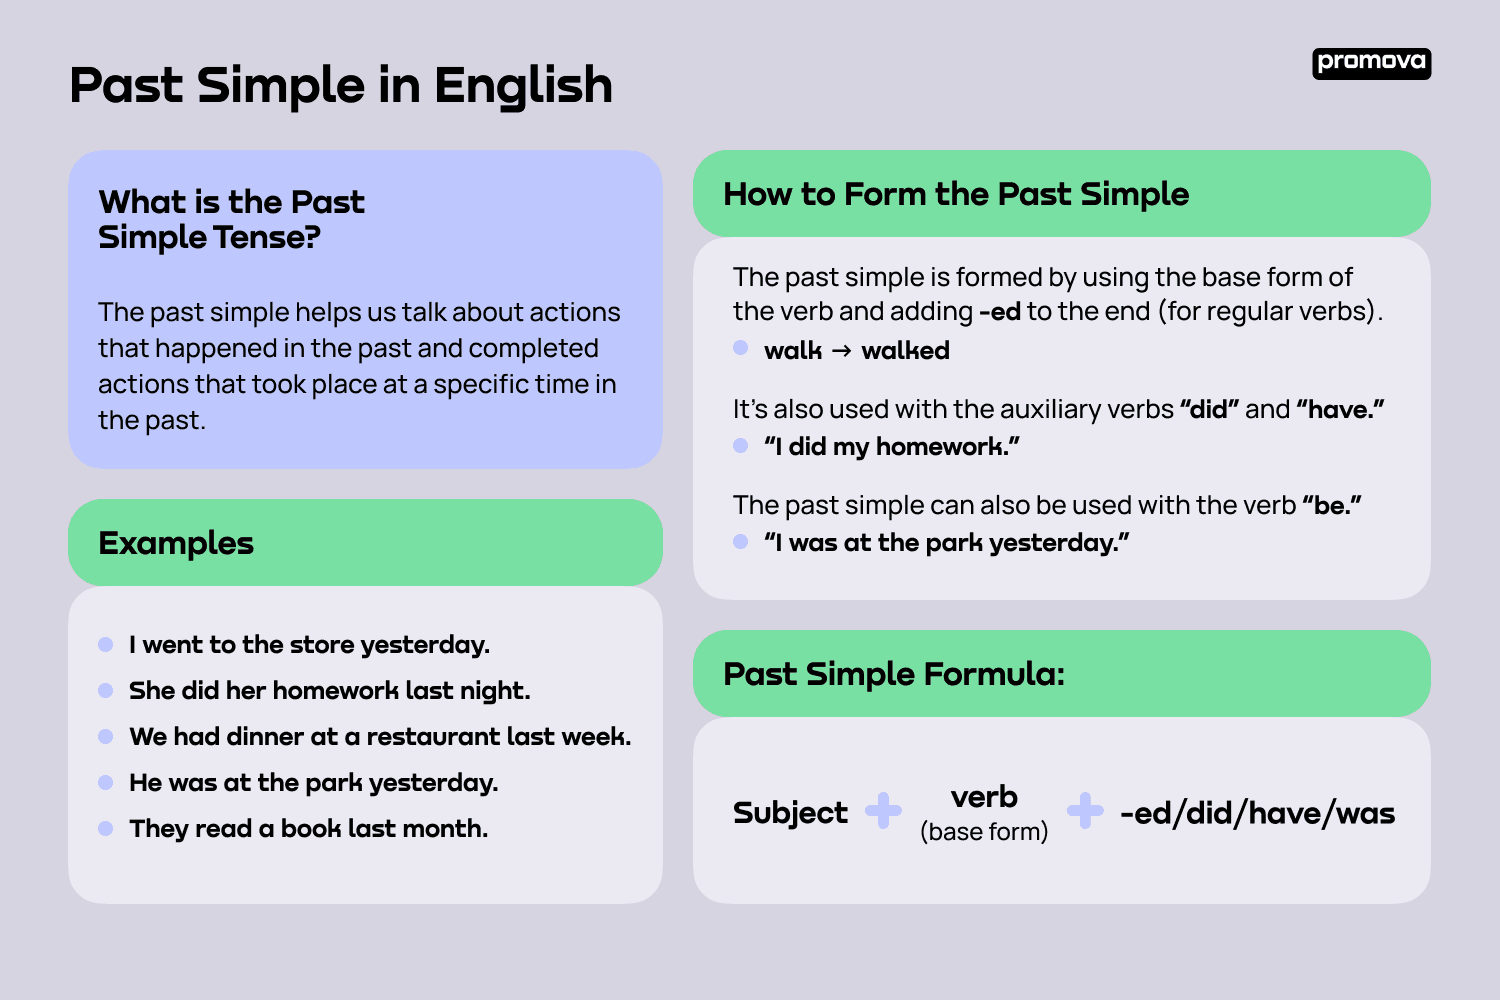 Past Simple in English